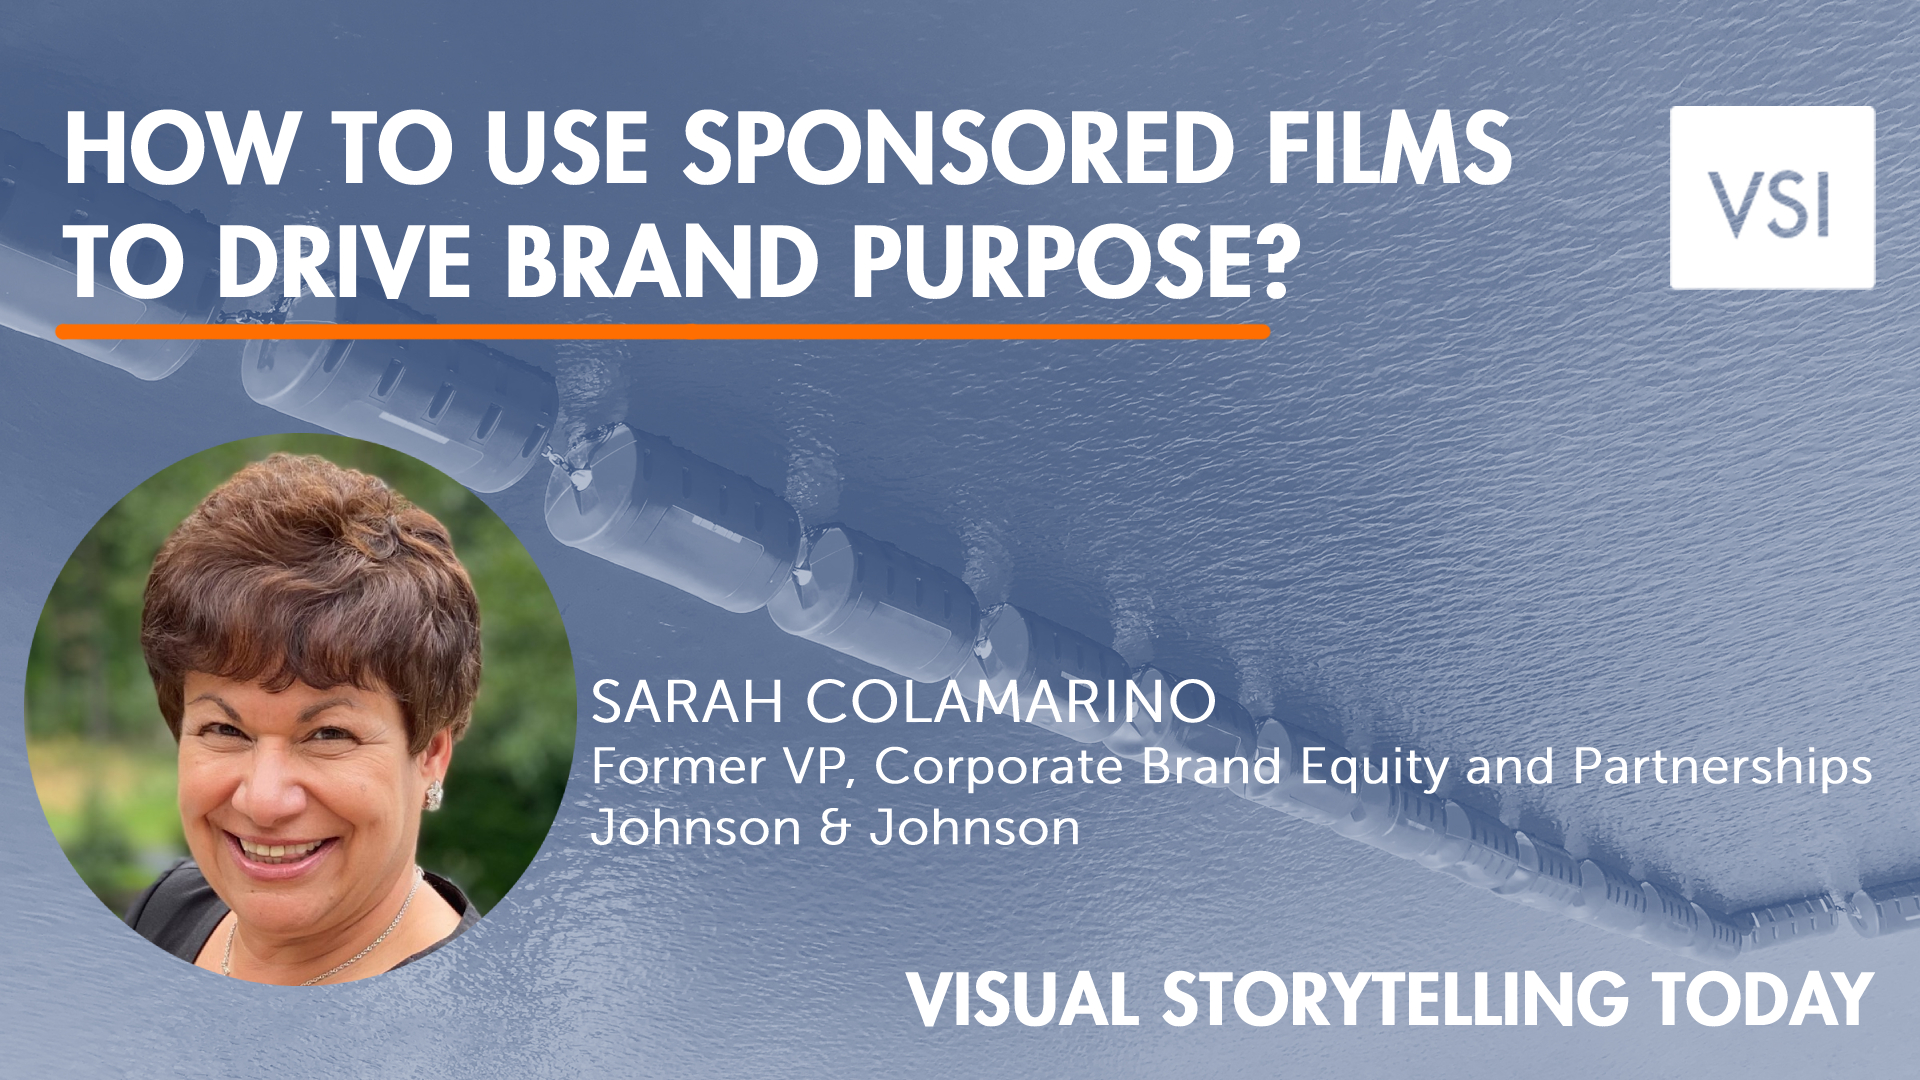 How to use sponsored films to drive brand purpose?